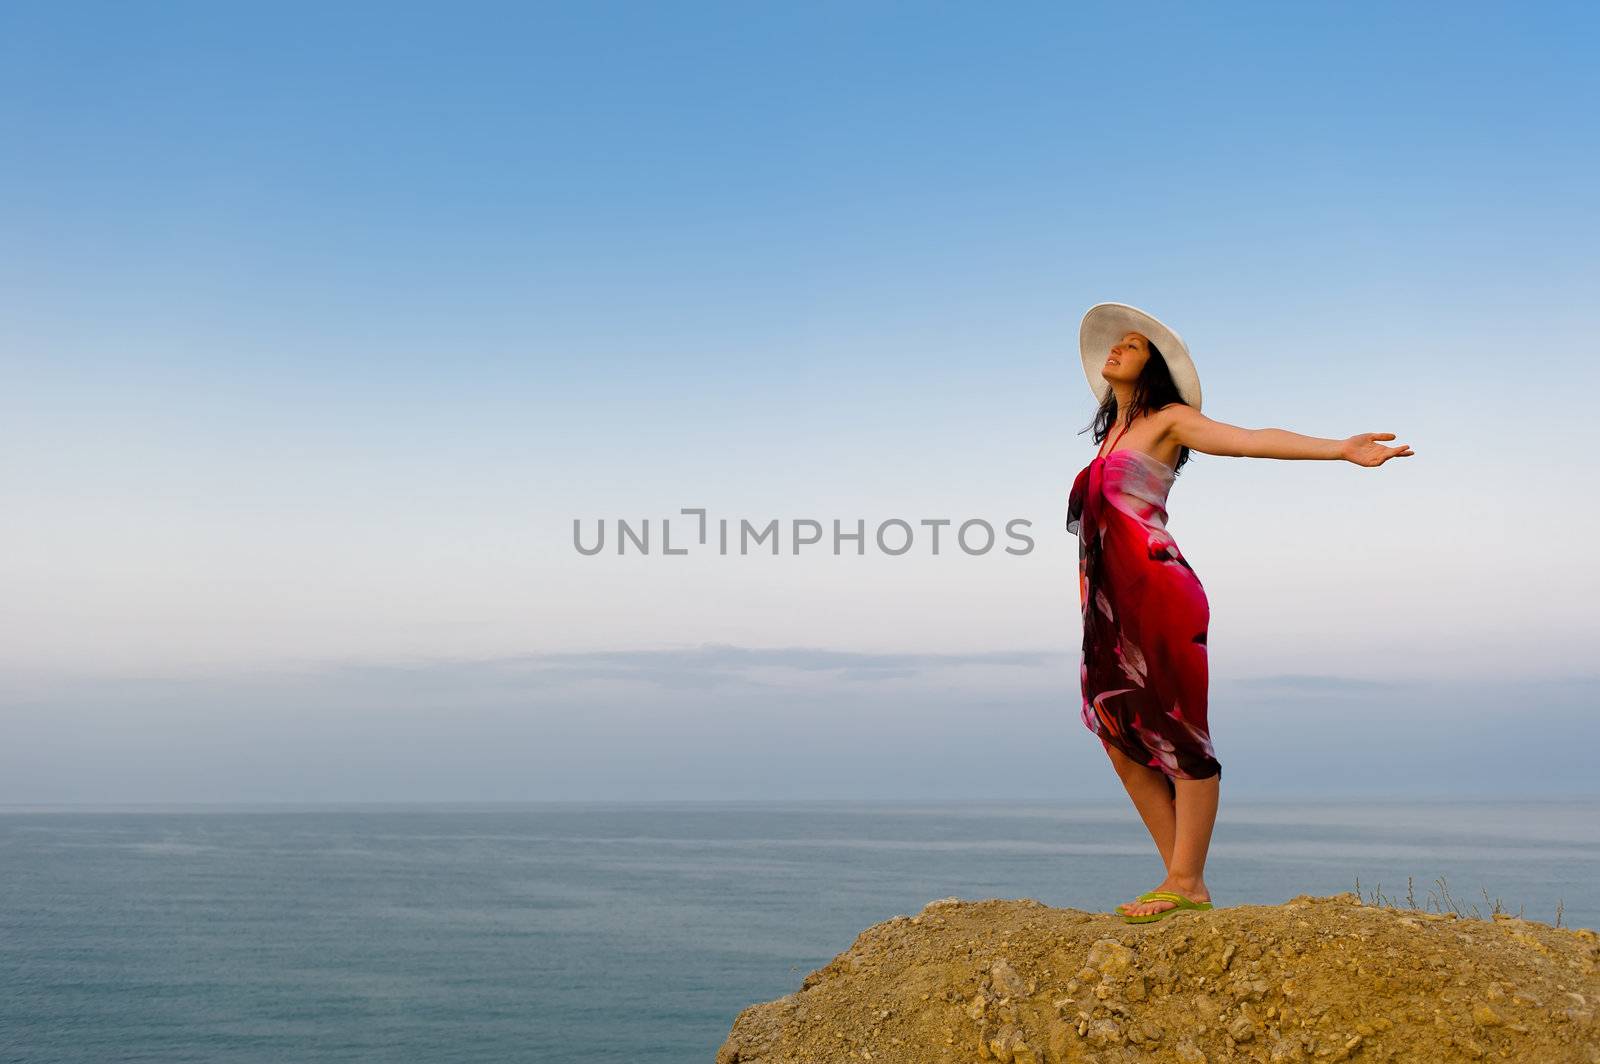 The woman on a mountain with open hands, against the blue sky